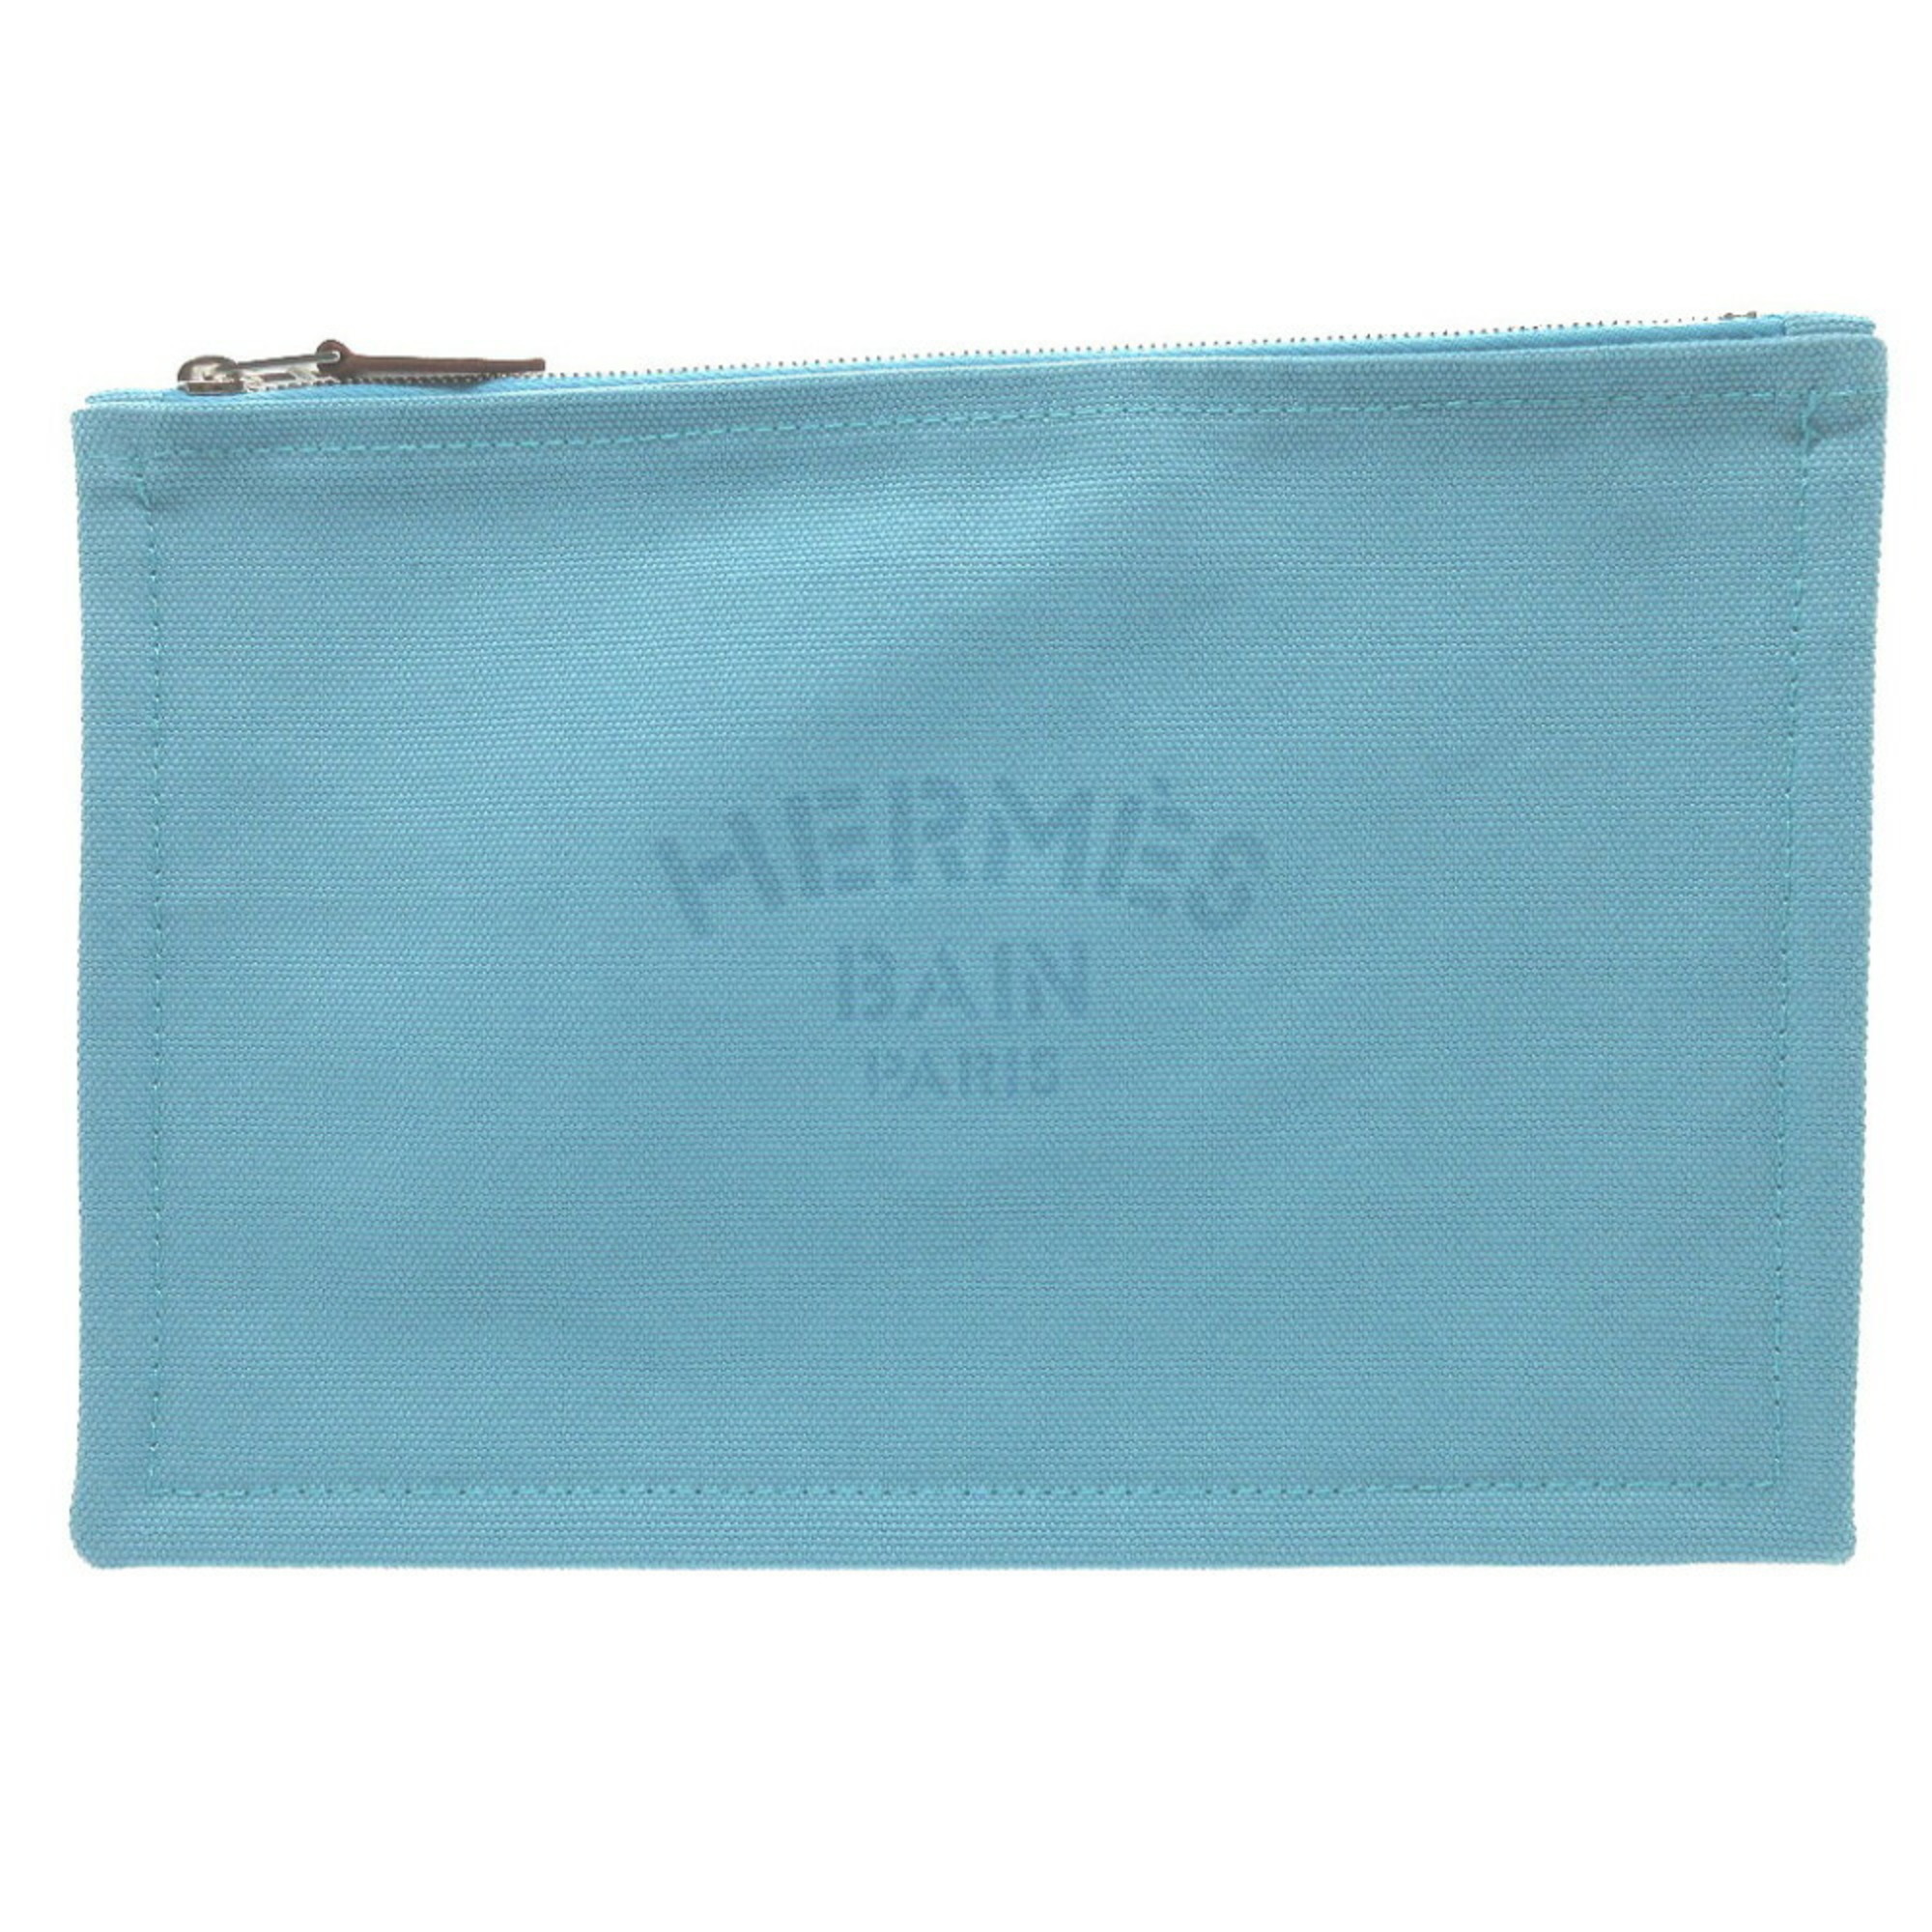 Hermes Yachting GM Canvas Light Blue Pouch 0141HERMES 6A0141BB4